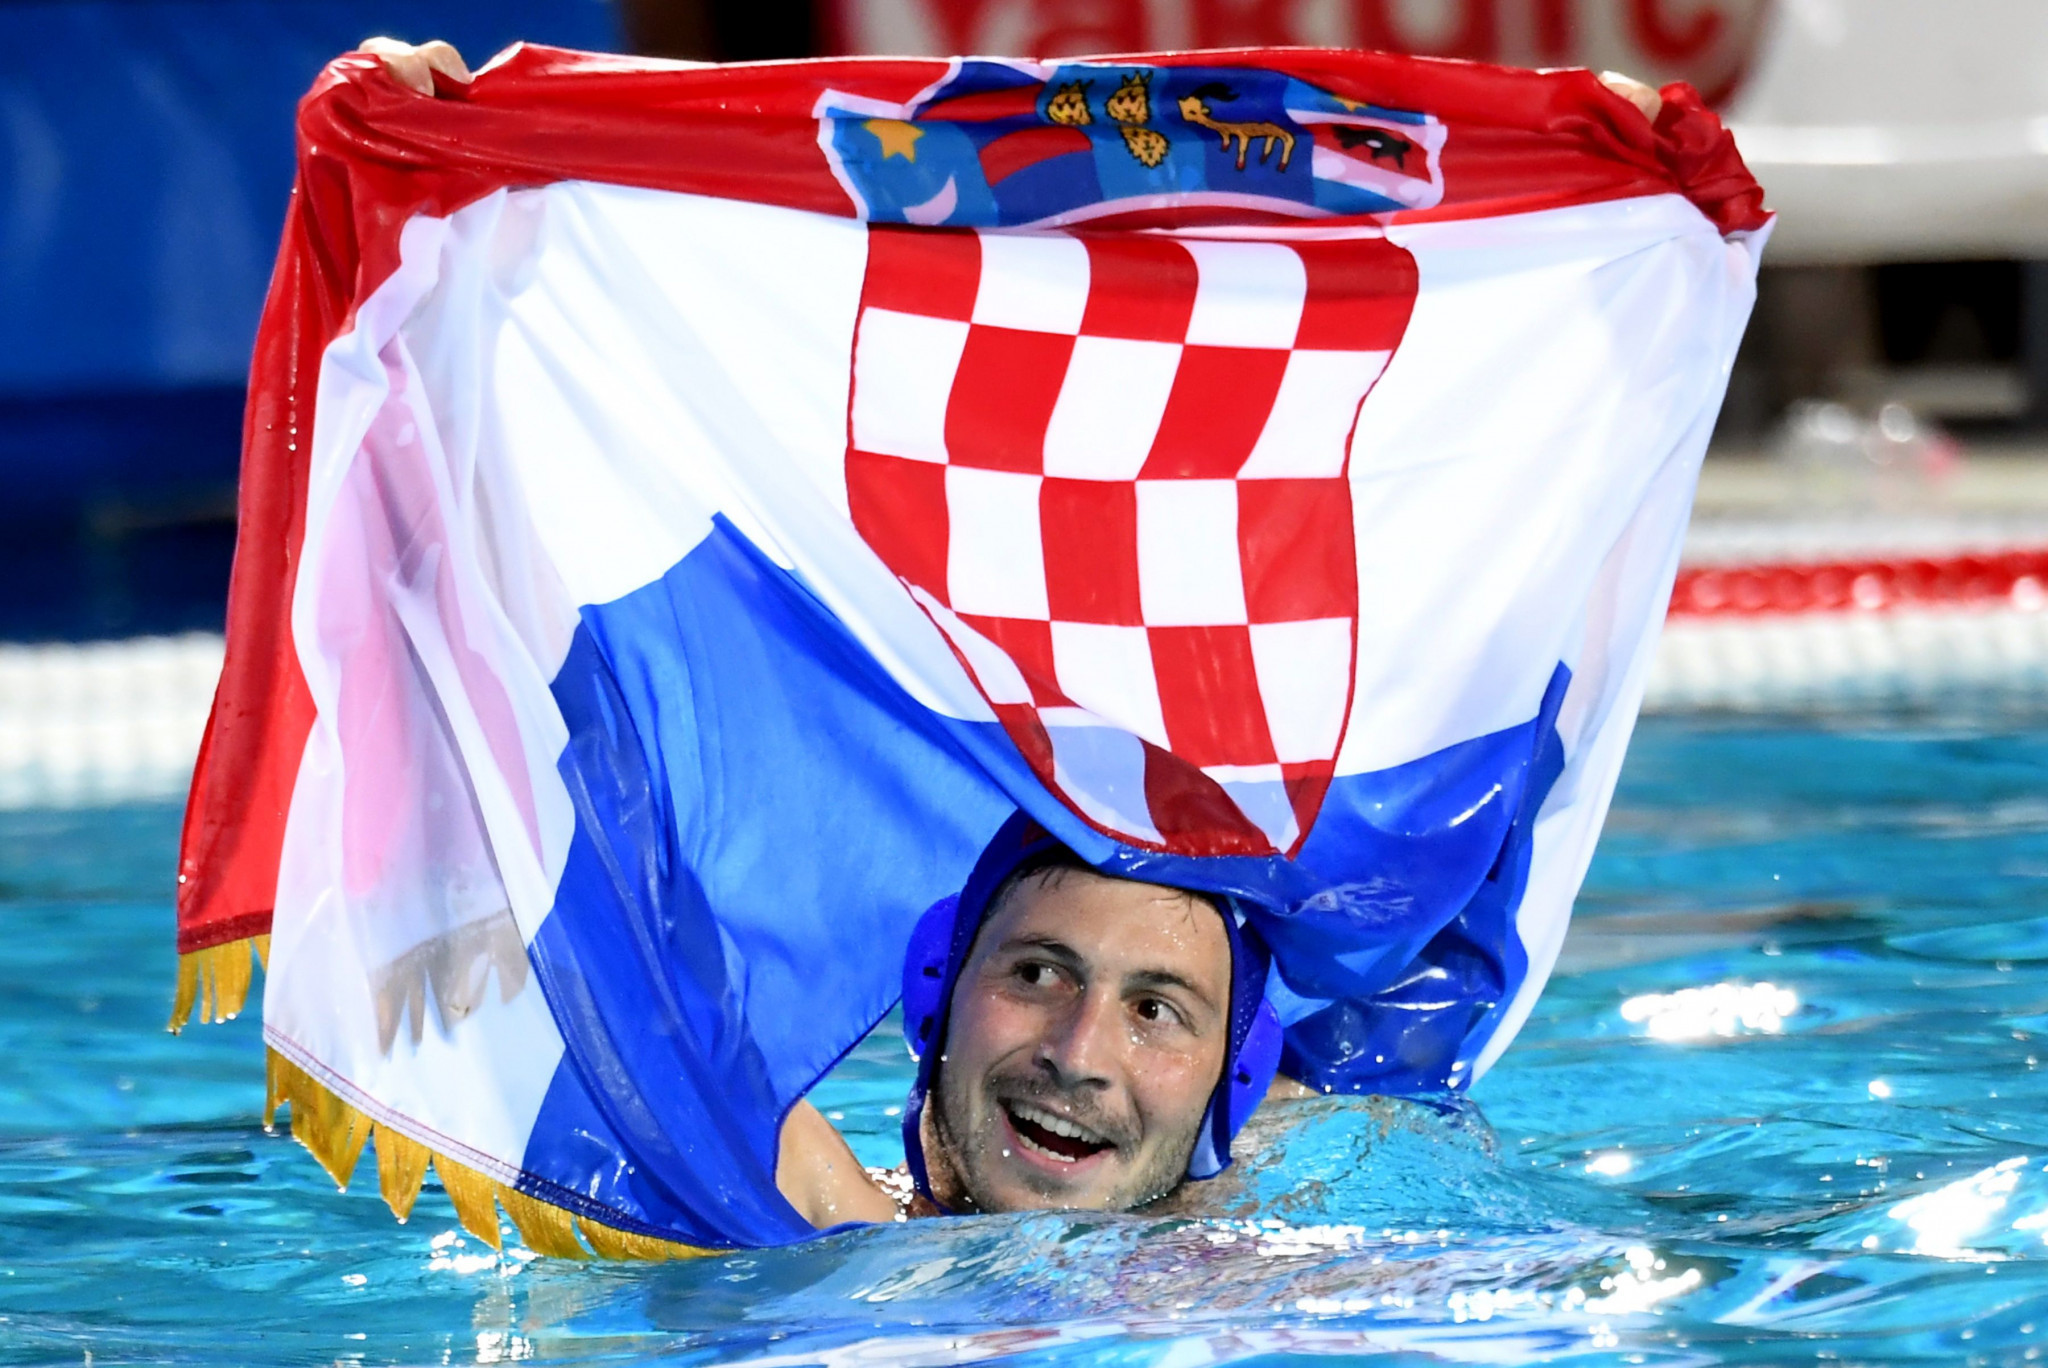 World champions Croatia will be another side to watch in Berlin ©Getty Images